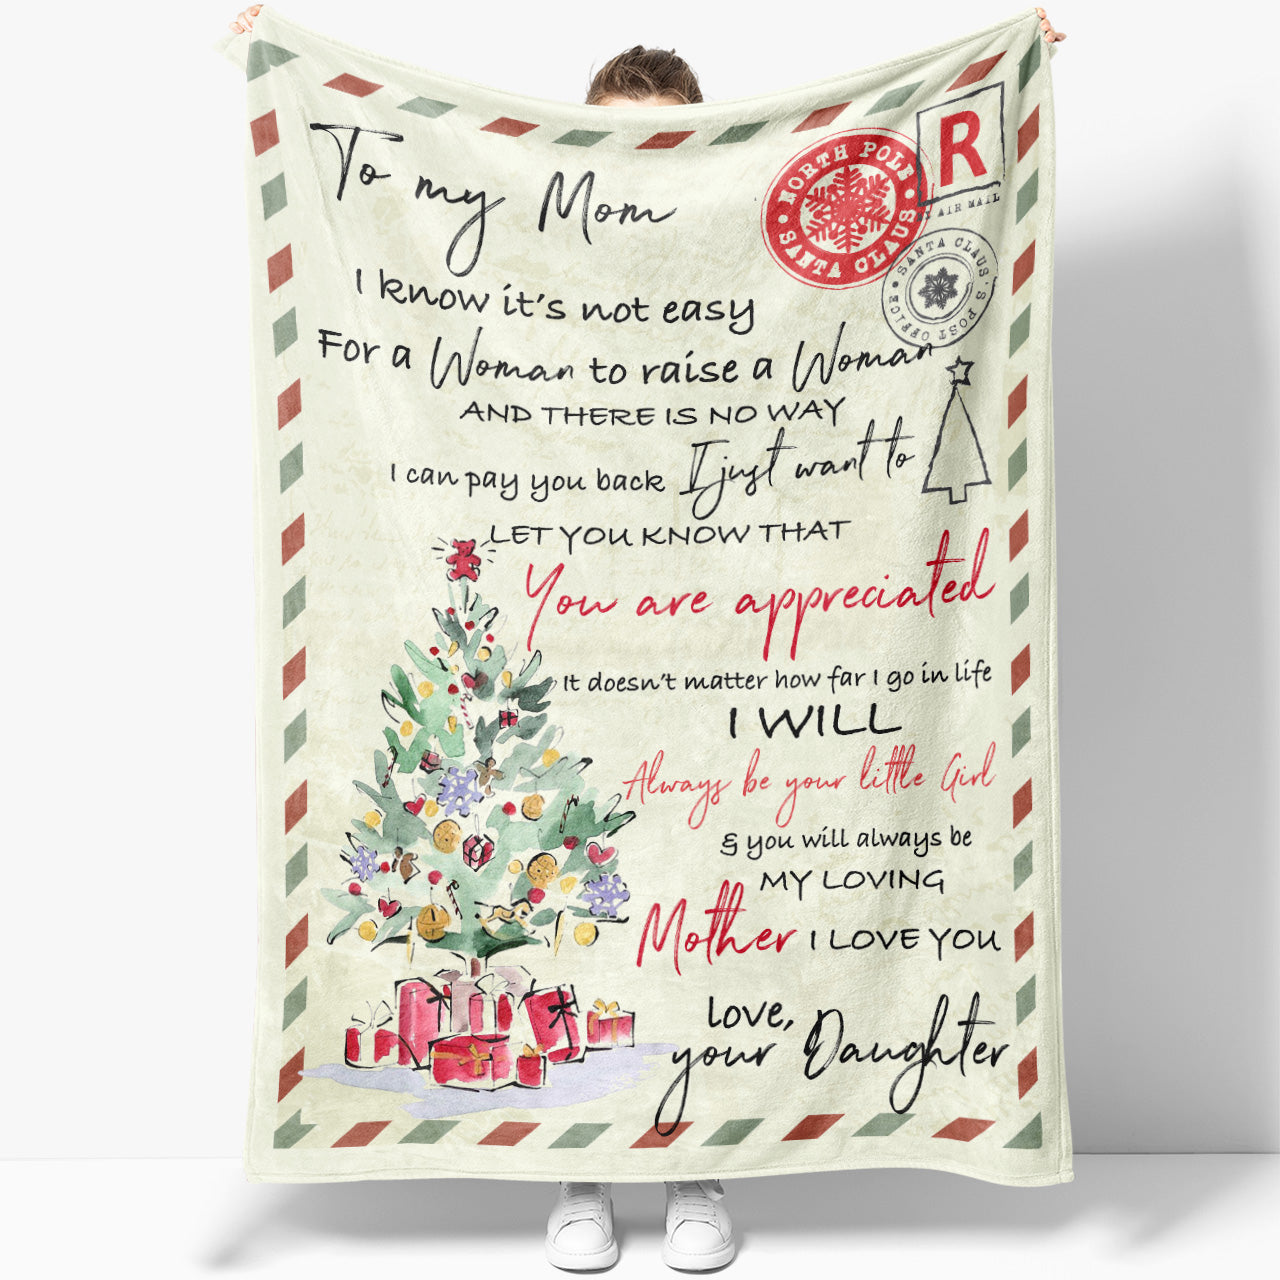 Blanket Gift ideas For Mom, Christmas Gifts For Mom, Its Not Easy, Gift For  Mother, Great Gifts For Mom, Best Mothers Day Gifts For Wife - Sweet Family  Gift